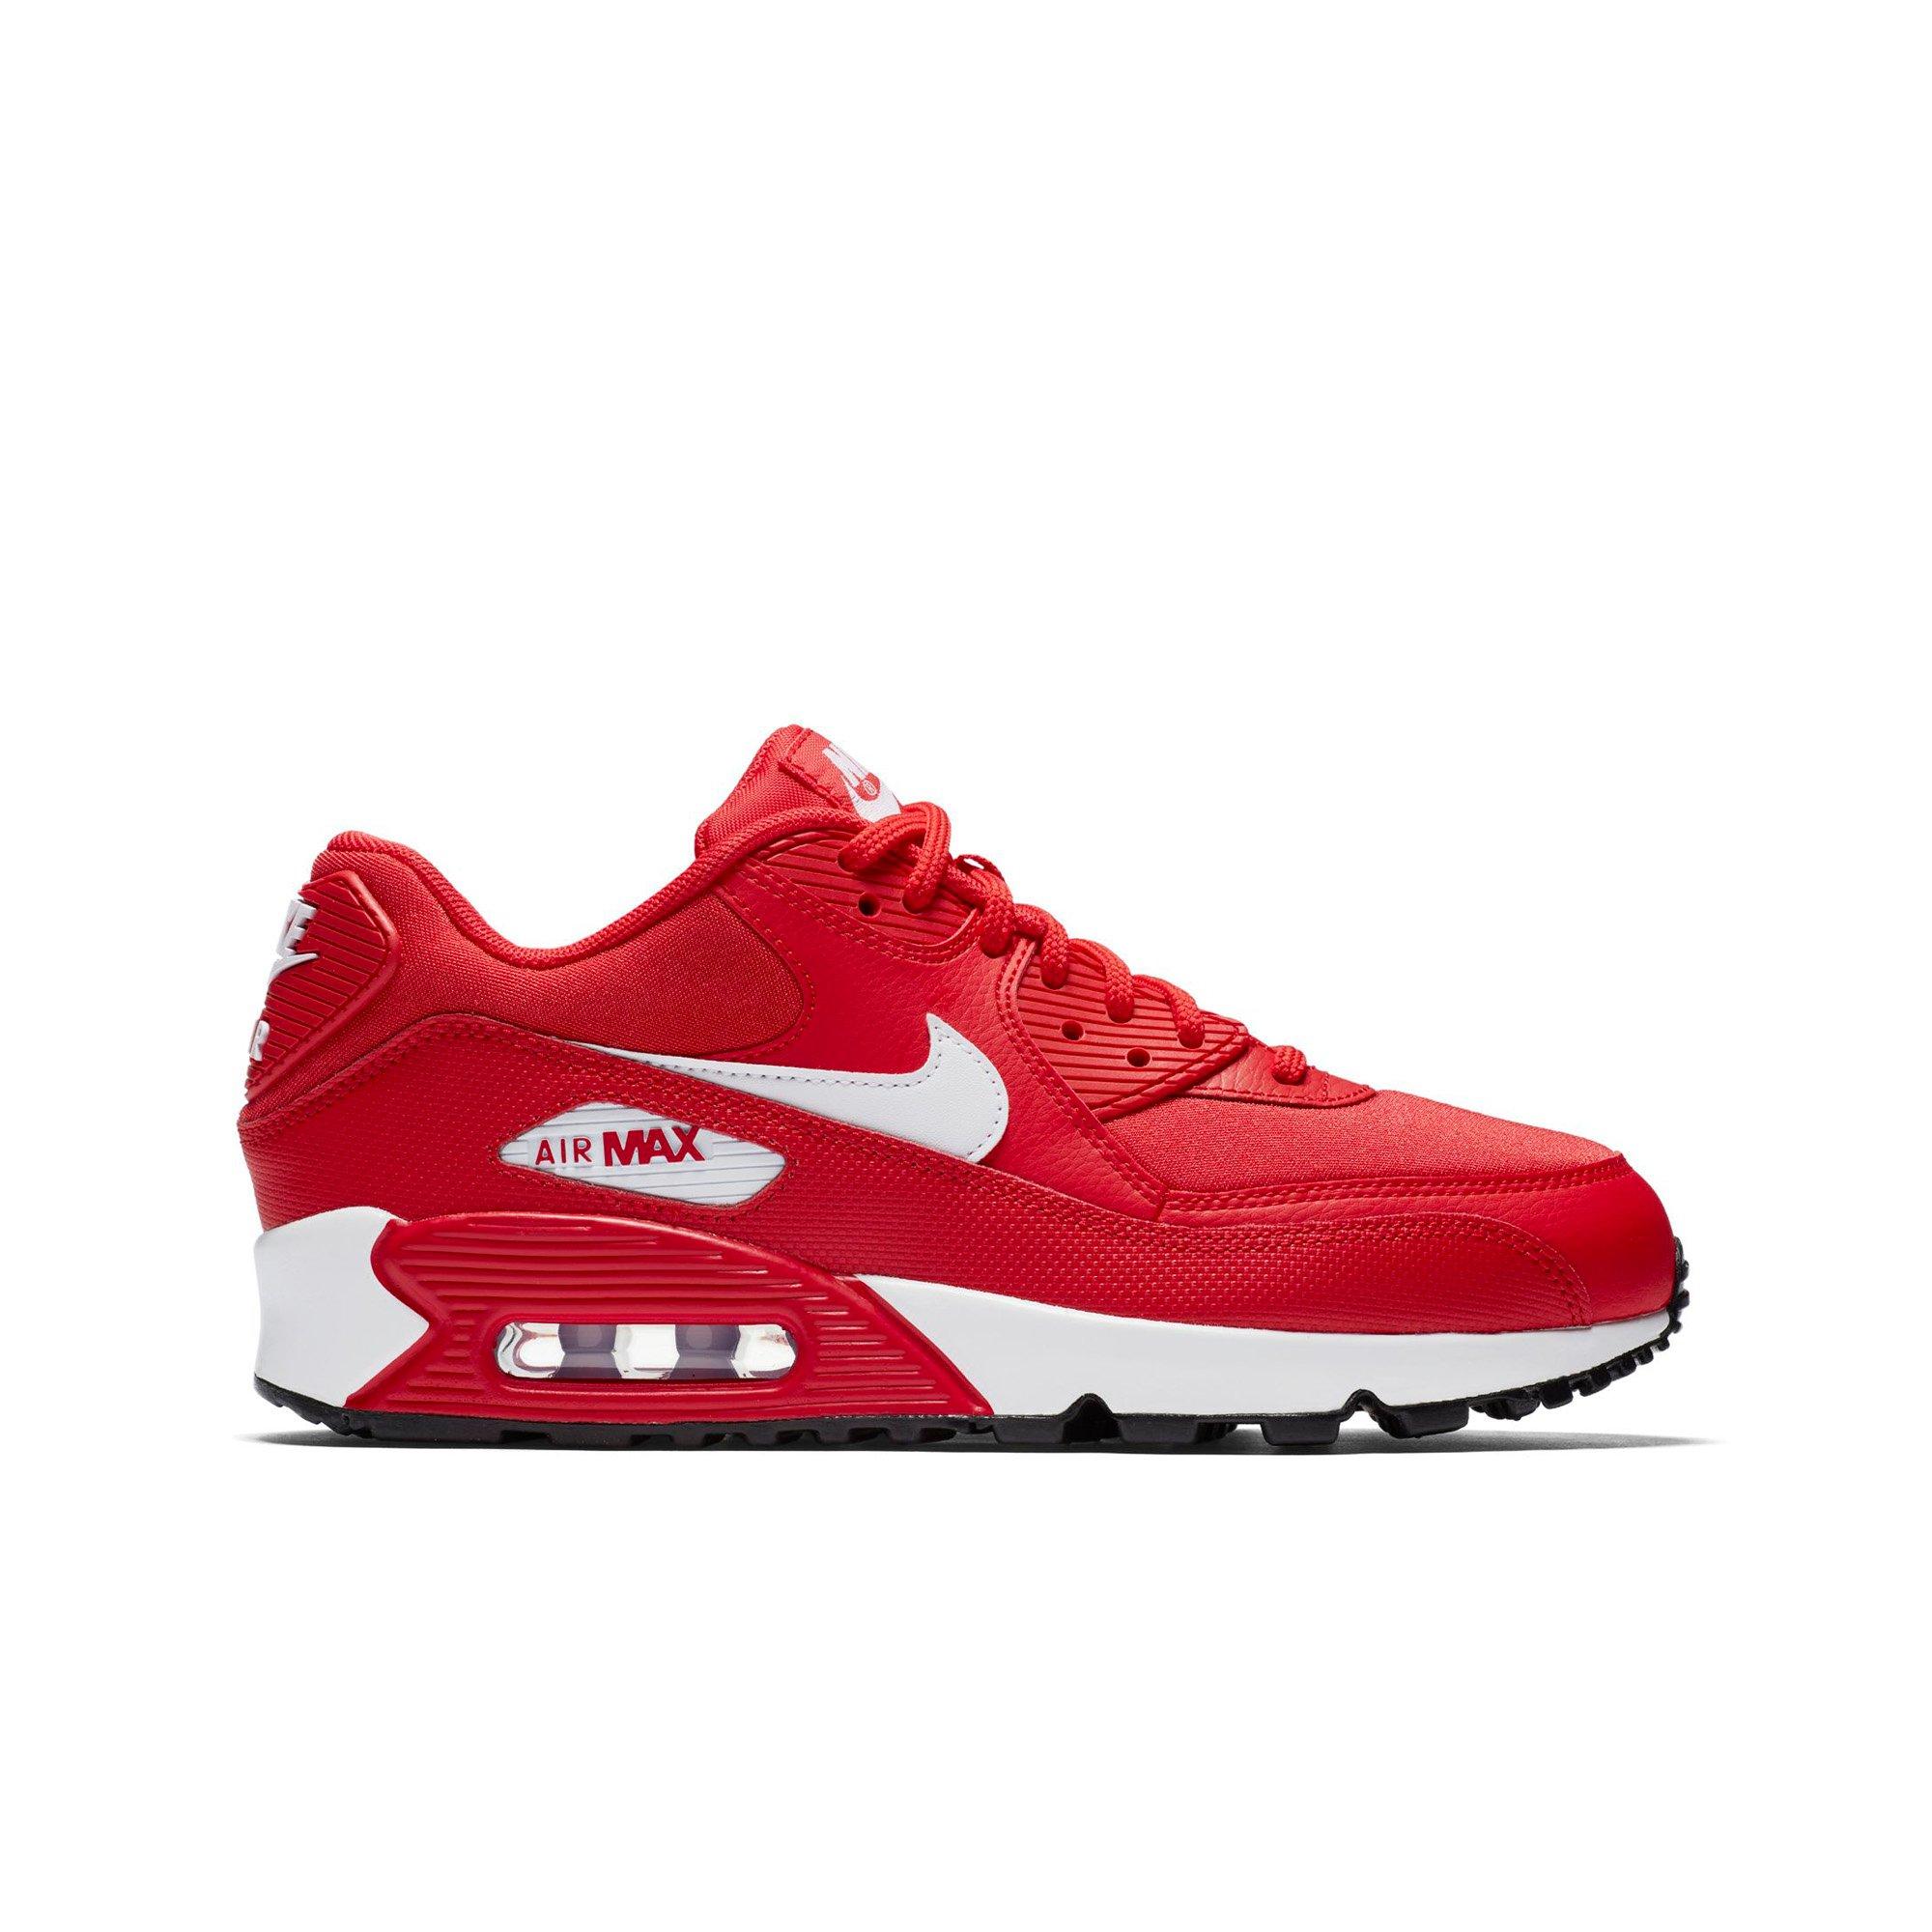 red nikes for women